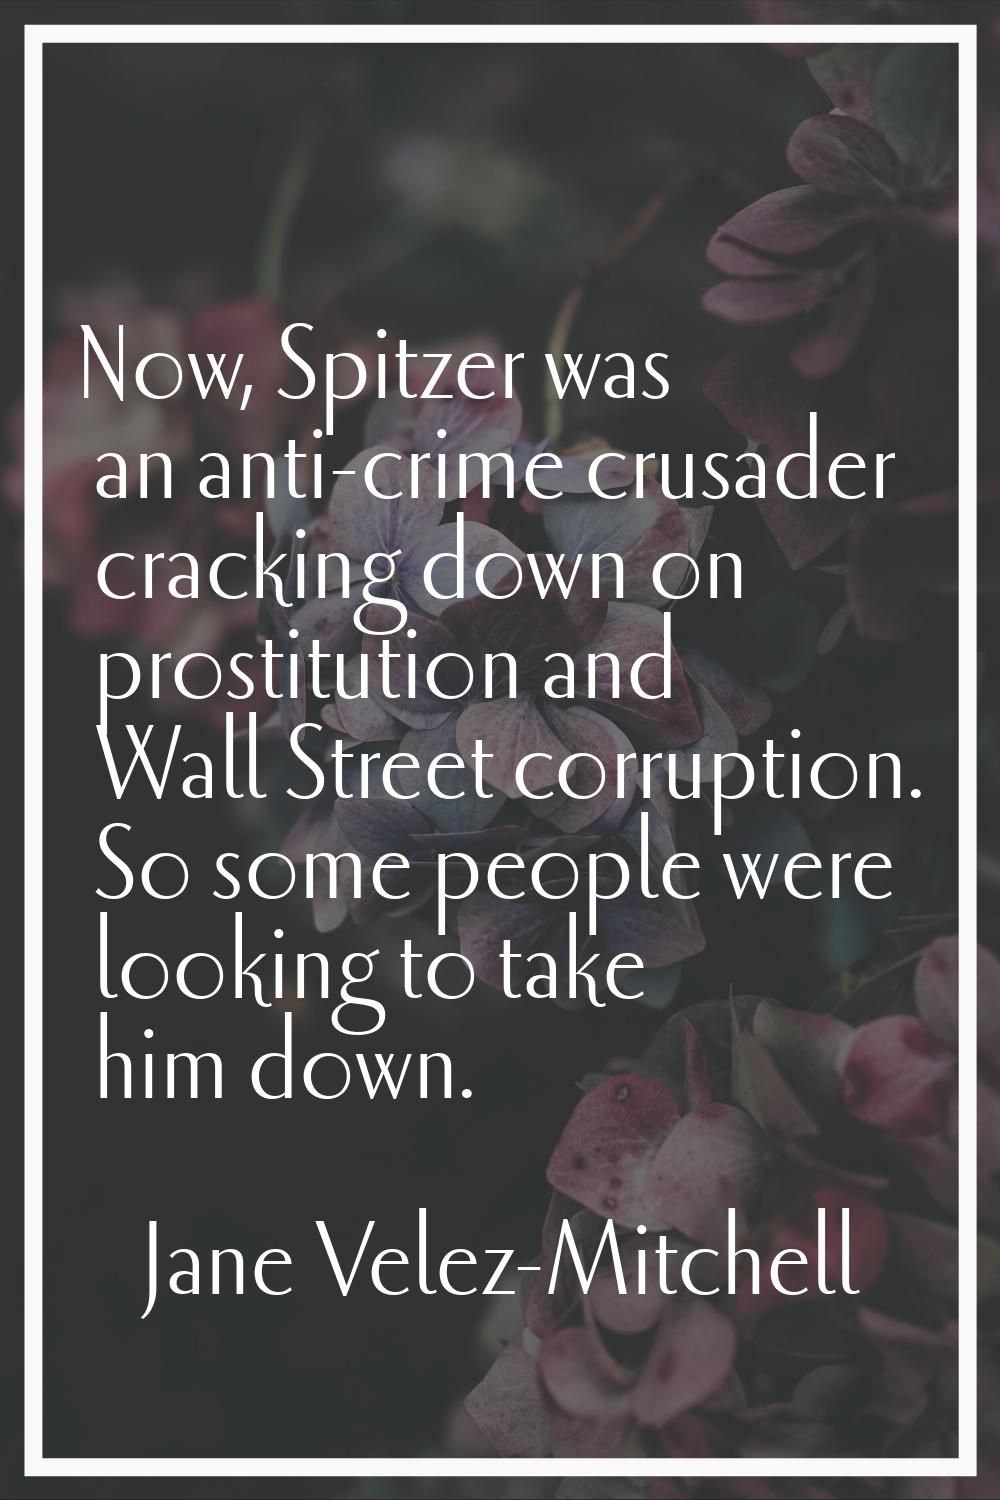 Now, Spitzer was an anti-crime crusader cracking down on prostitution and Wall Street corruption. S